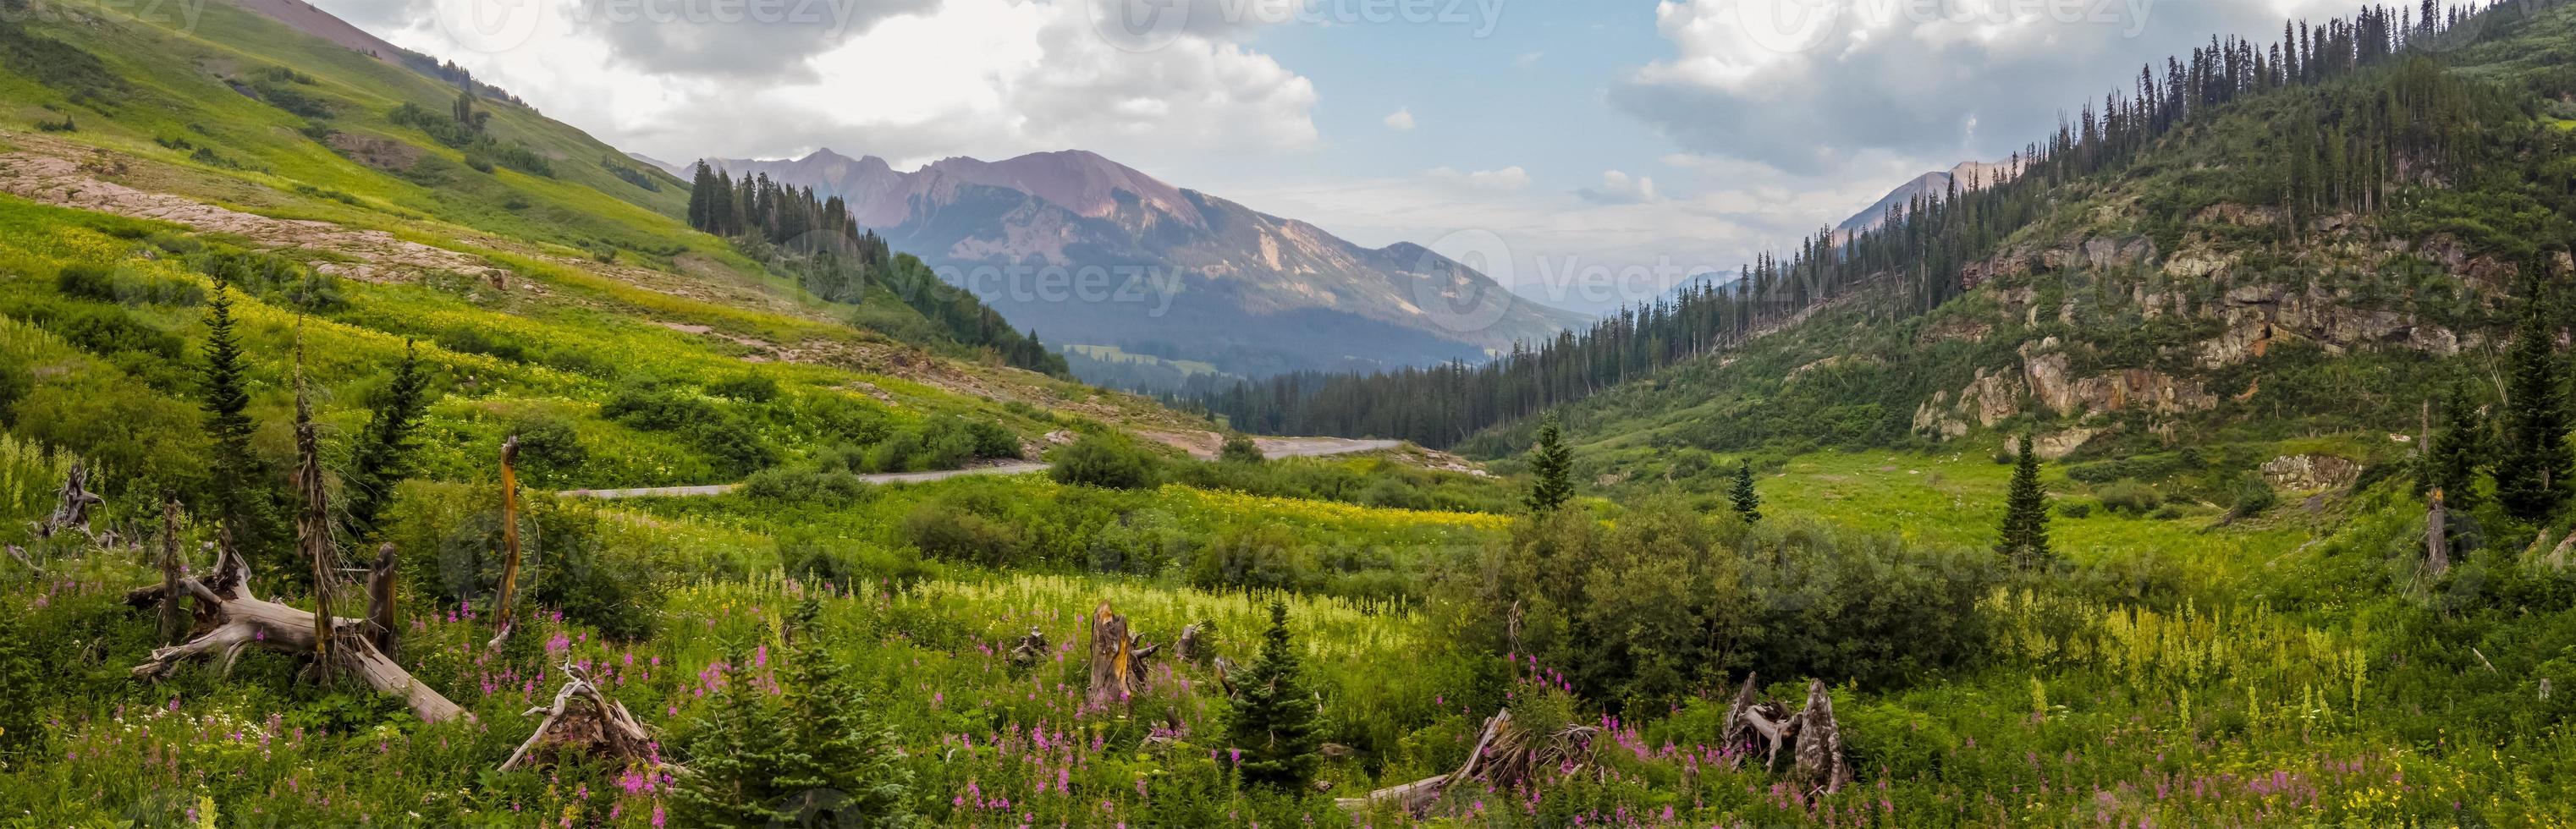 Panoramic view of wildflower meadows in Colorado rocky mountains near Crested Butte photo